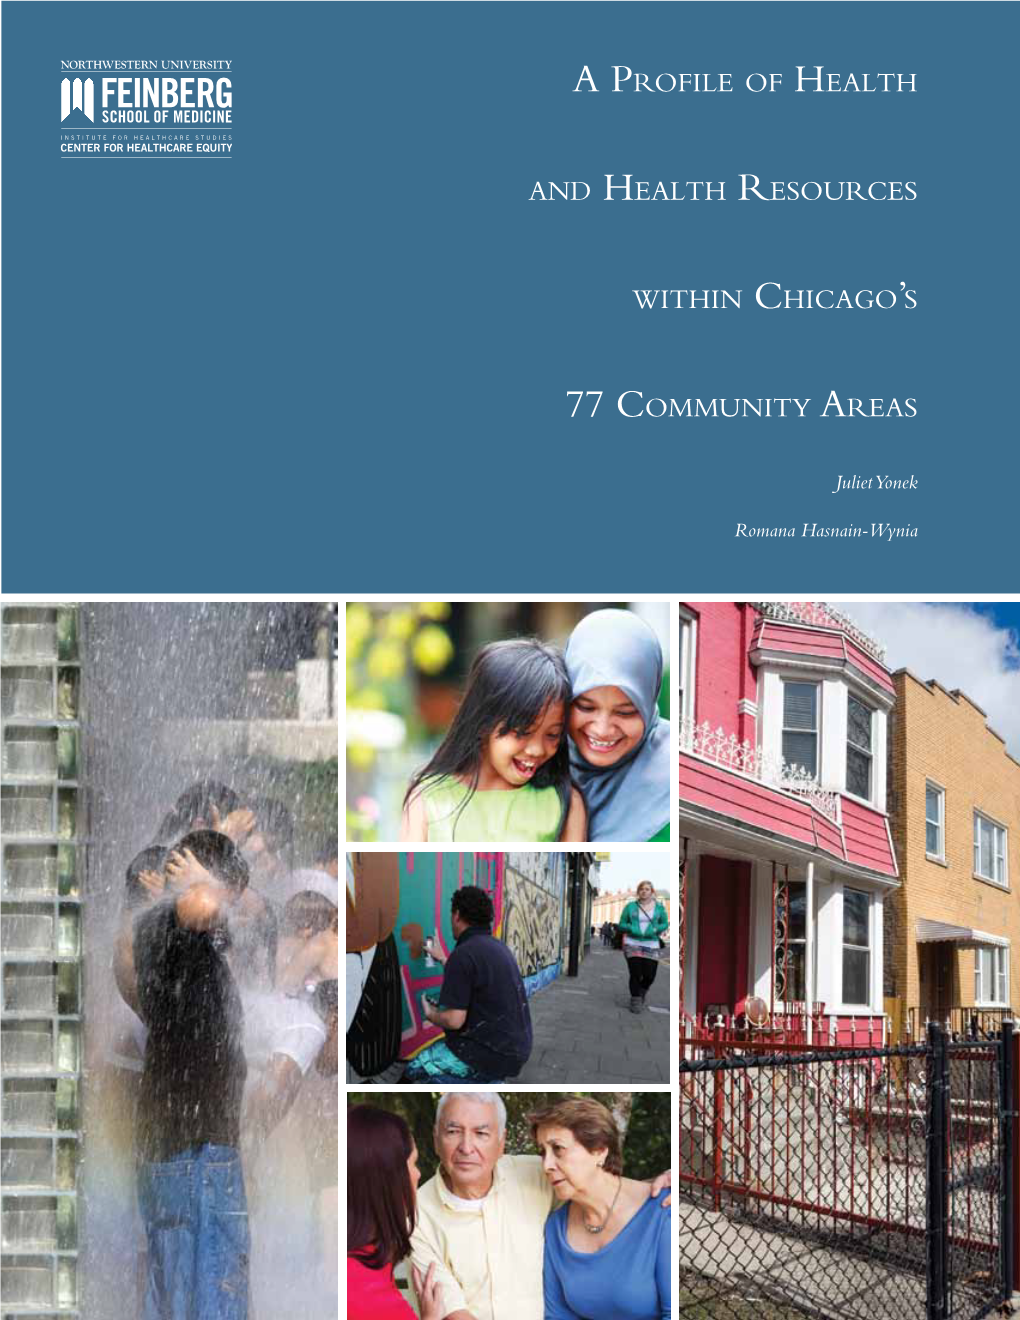 A Profile of Health and Health Resources Within Chicago's 77